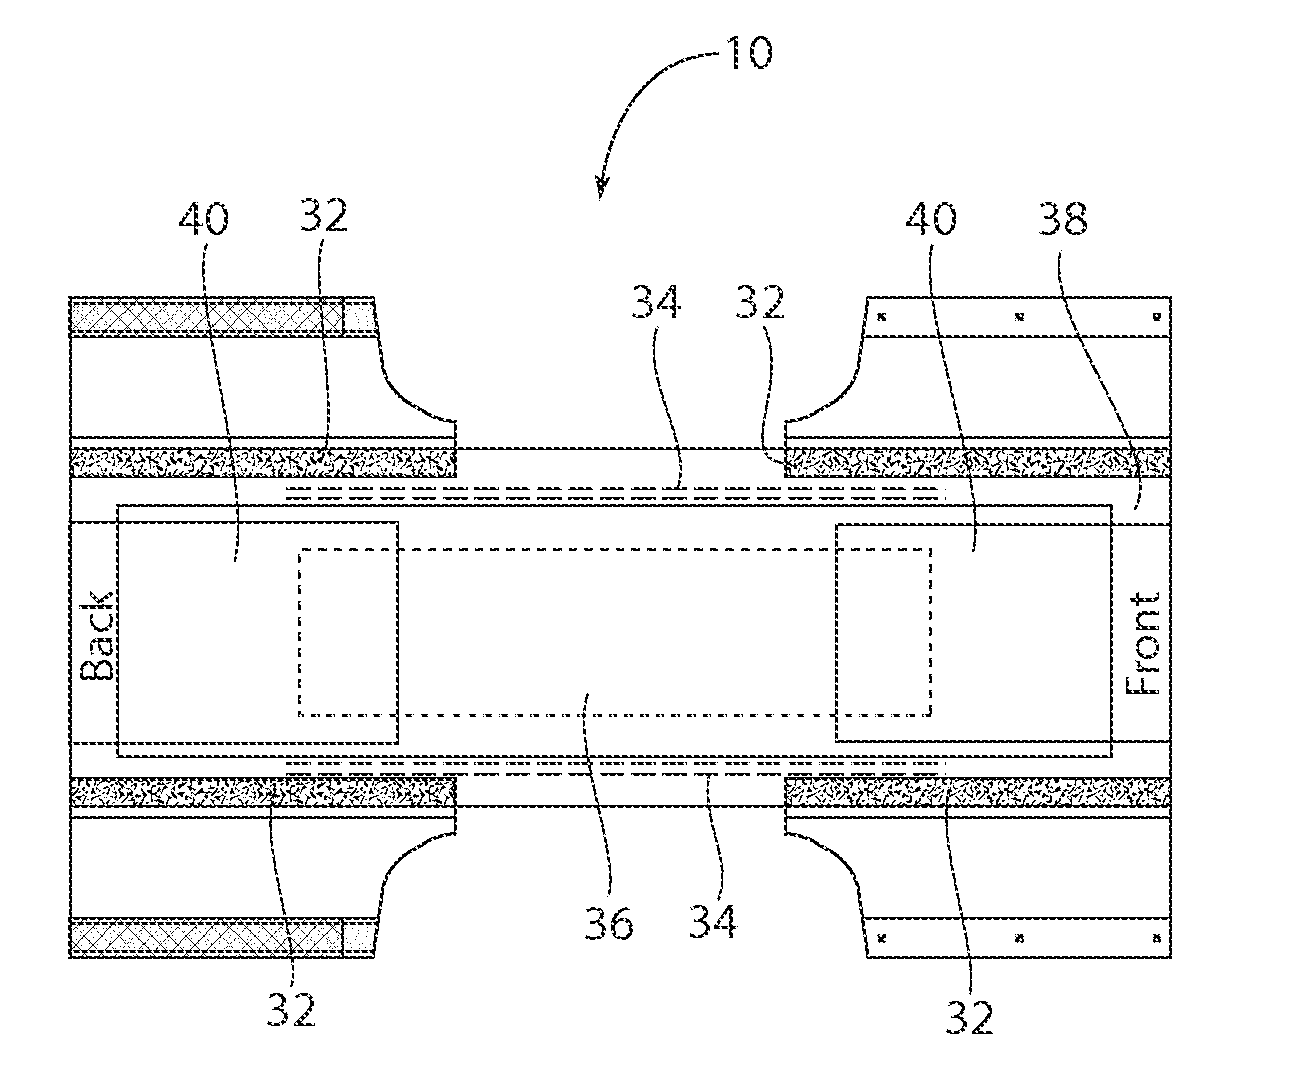 Apparatus and method for forming a pant-type diaper with refastenable side seams